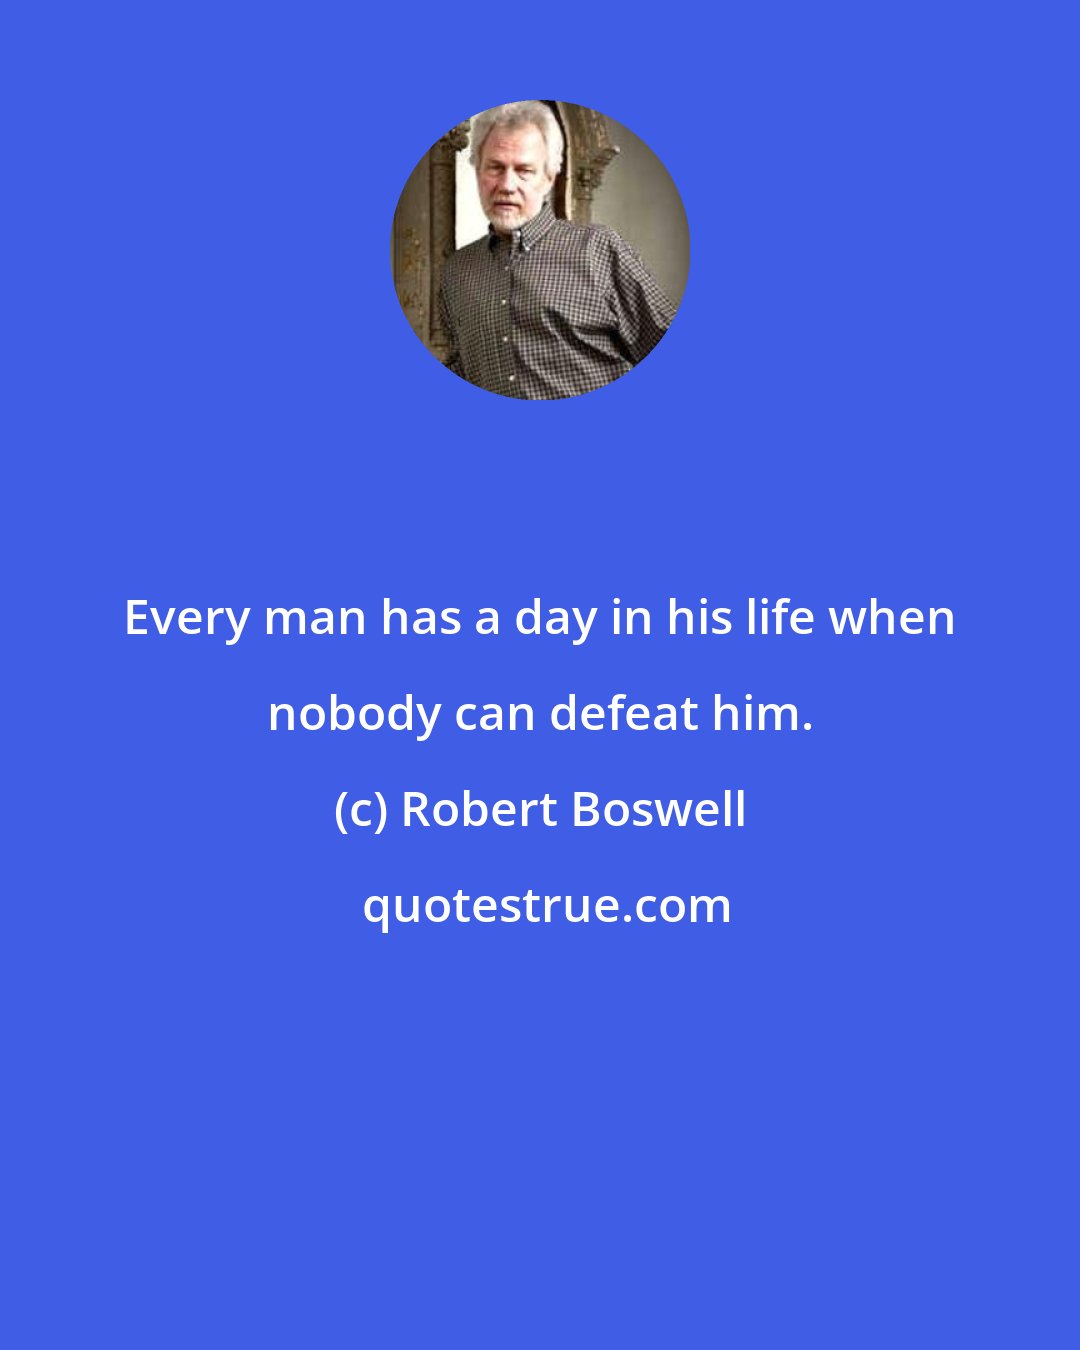 Robert Boswell: Every man has a day in his life when nobody can defeat him.